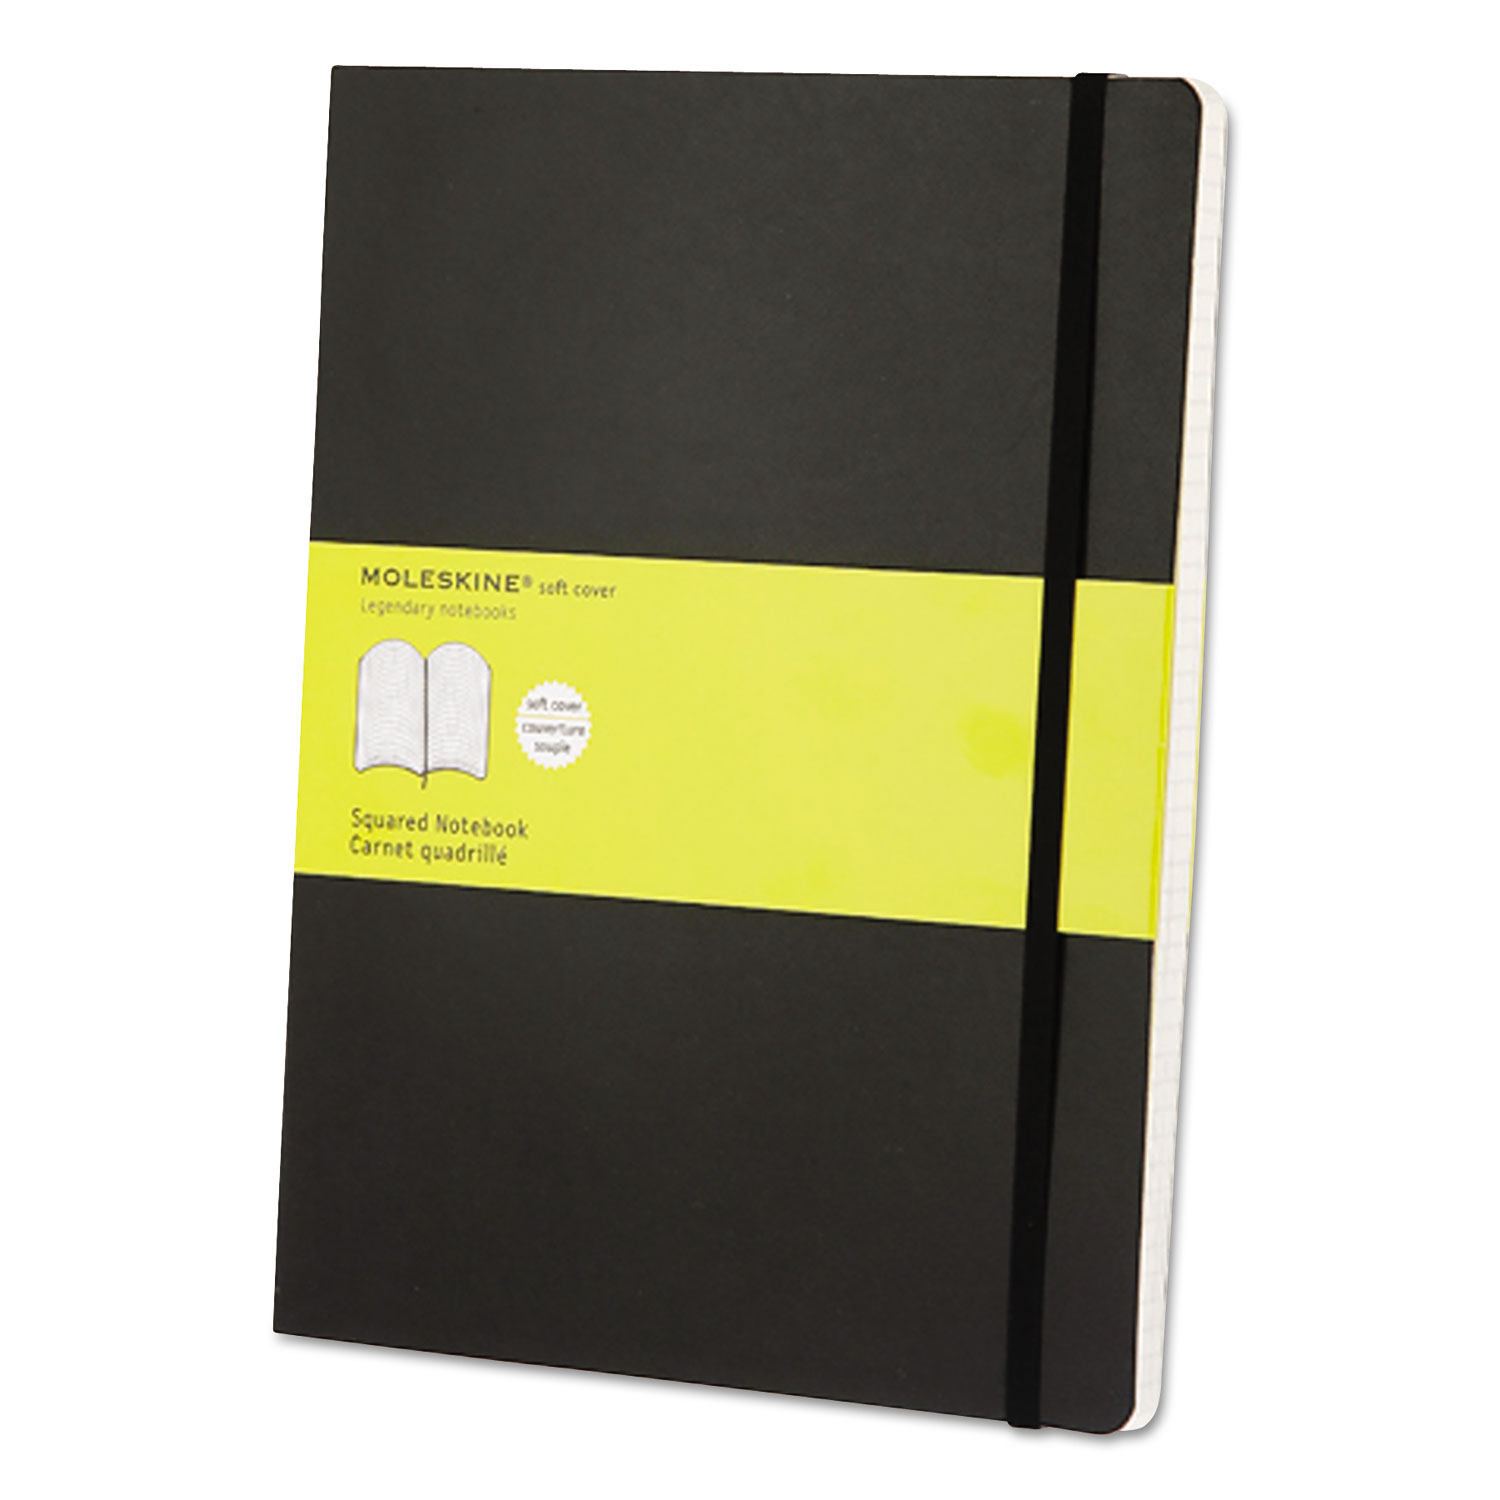  Moleskine 9788883707247 Classic Softcover Notebook, 1 Subject, Quadrille Rule, Black Cover, 10 x 7.5, 192 Sheets (HBGMSX15) 